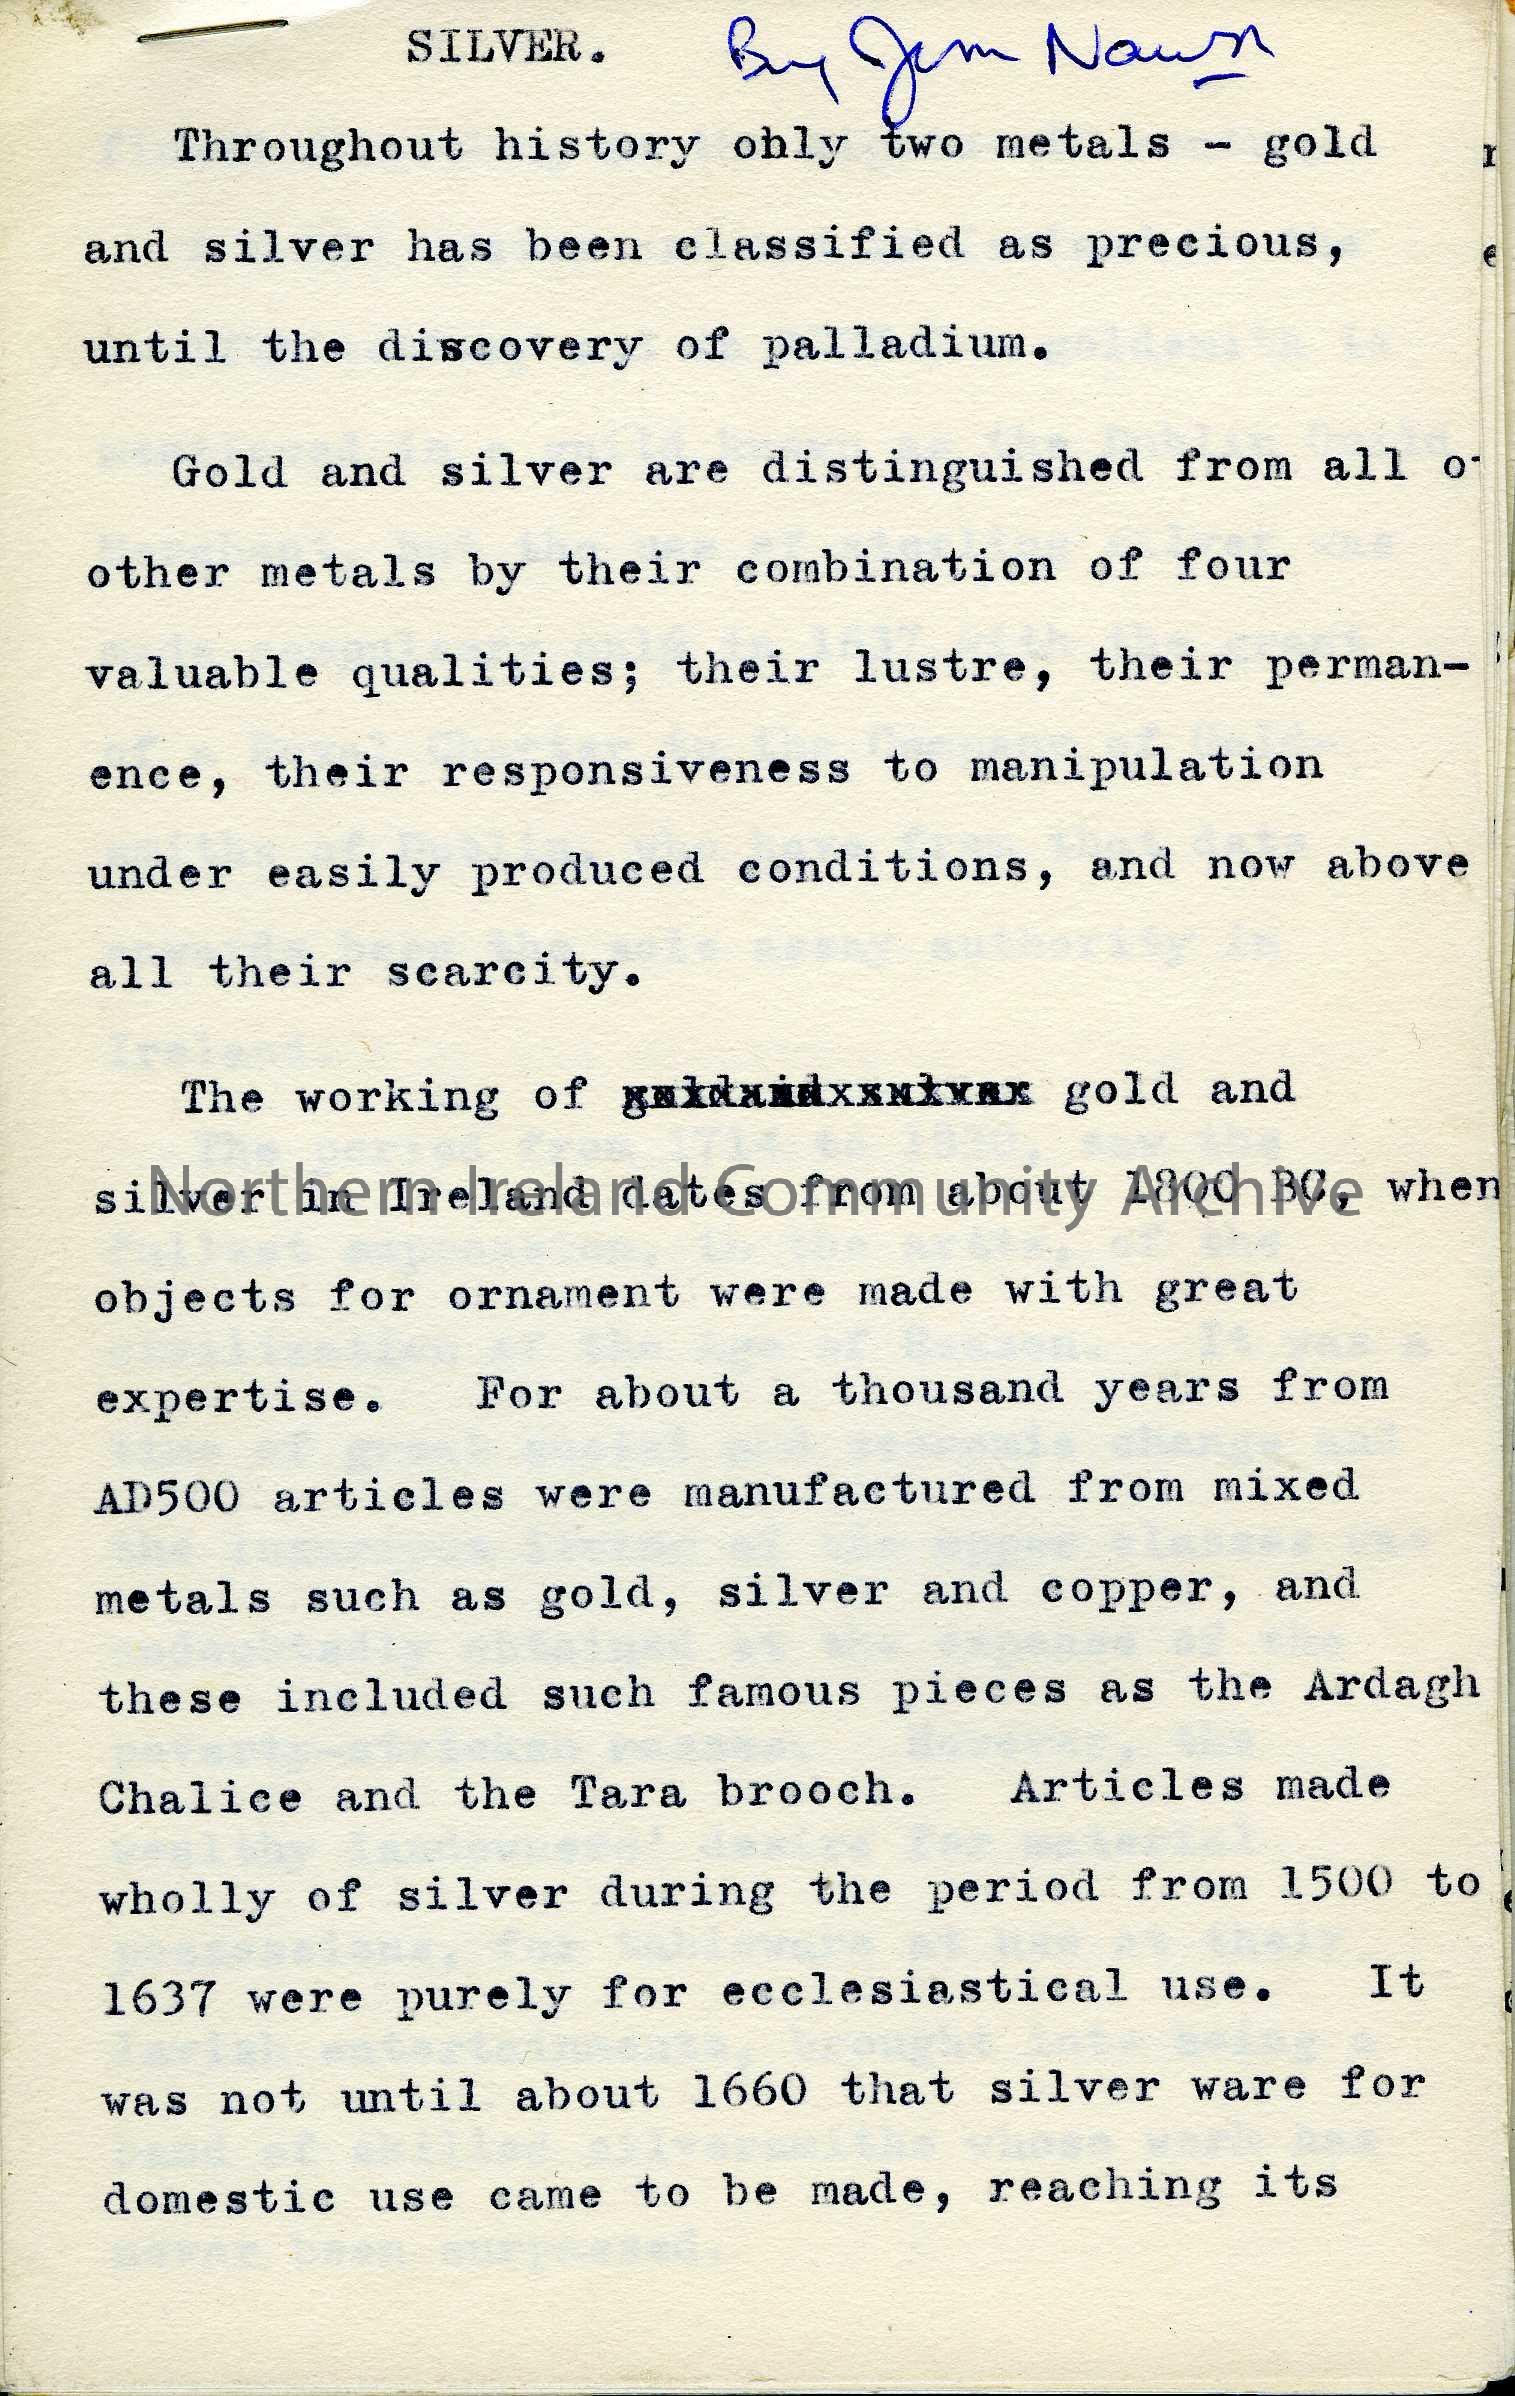 booklet titled, Silver. By Jim Nawn. Details on the silver making process in Ireland (2560)